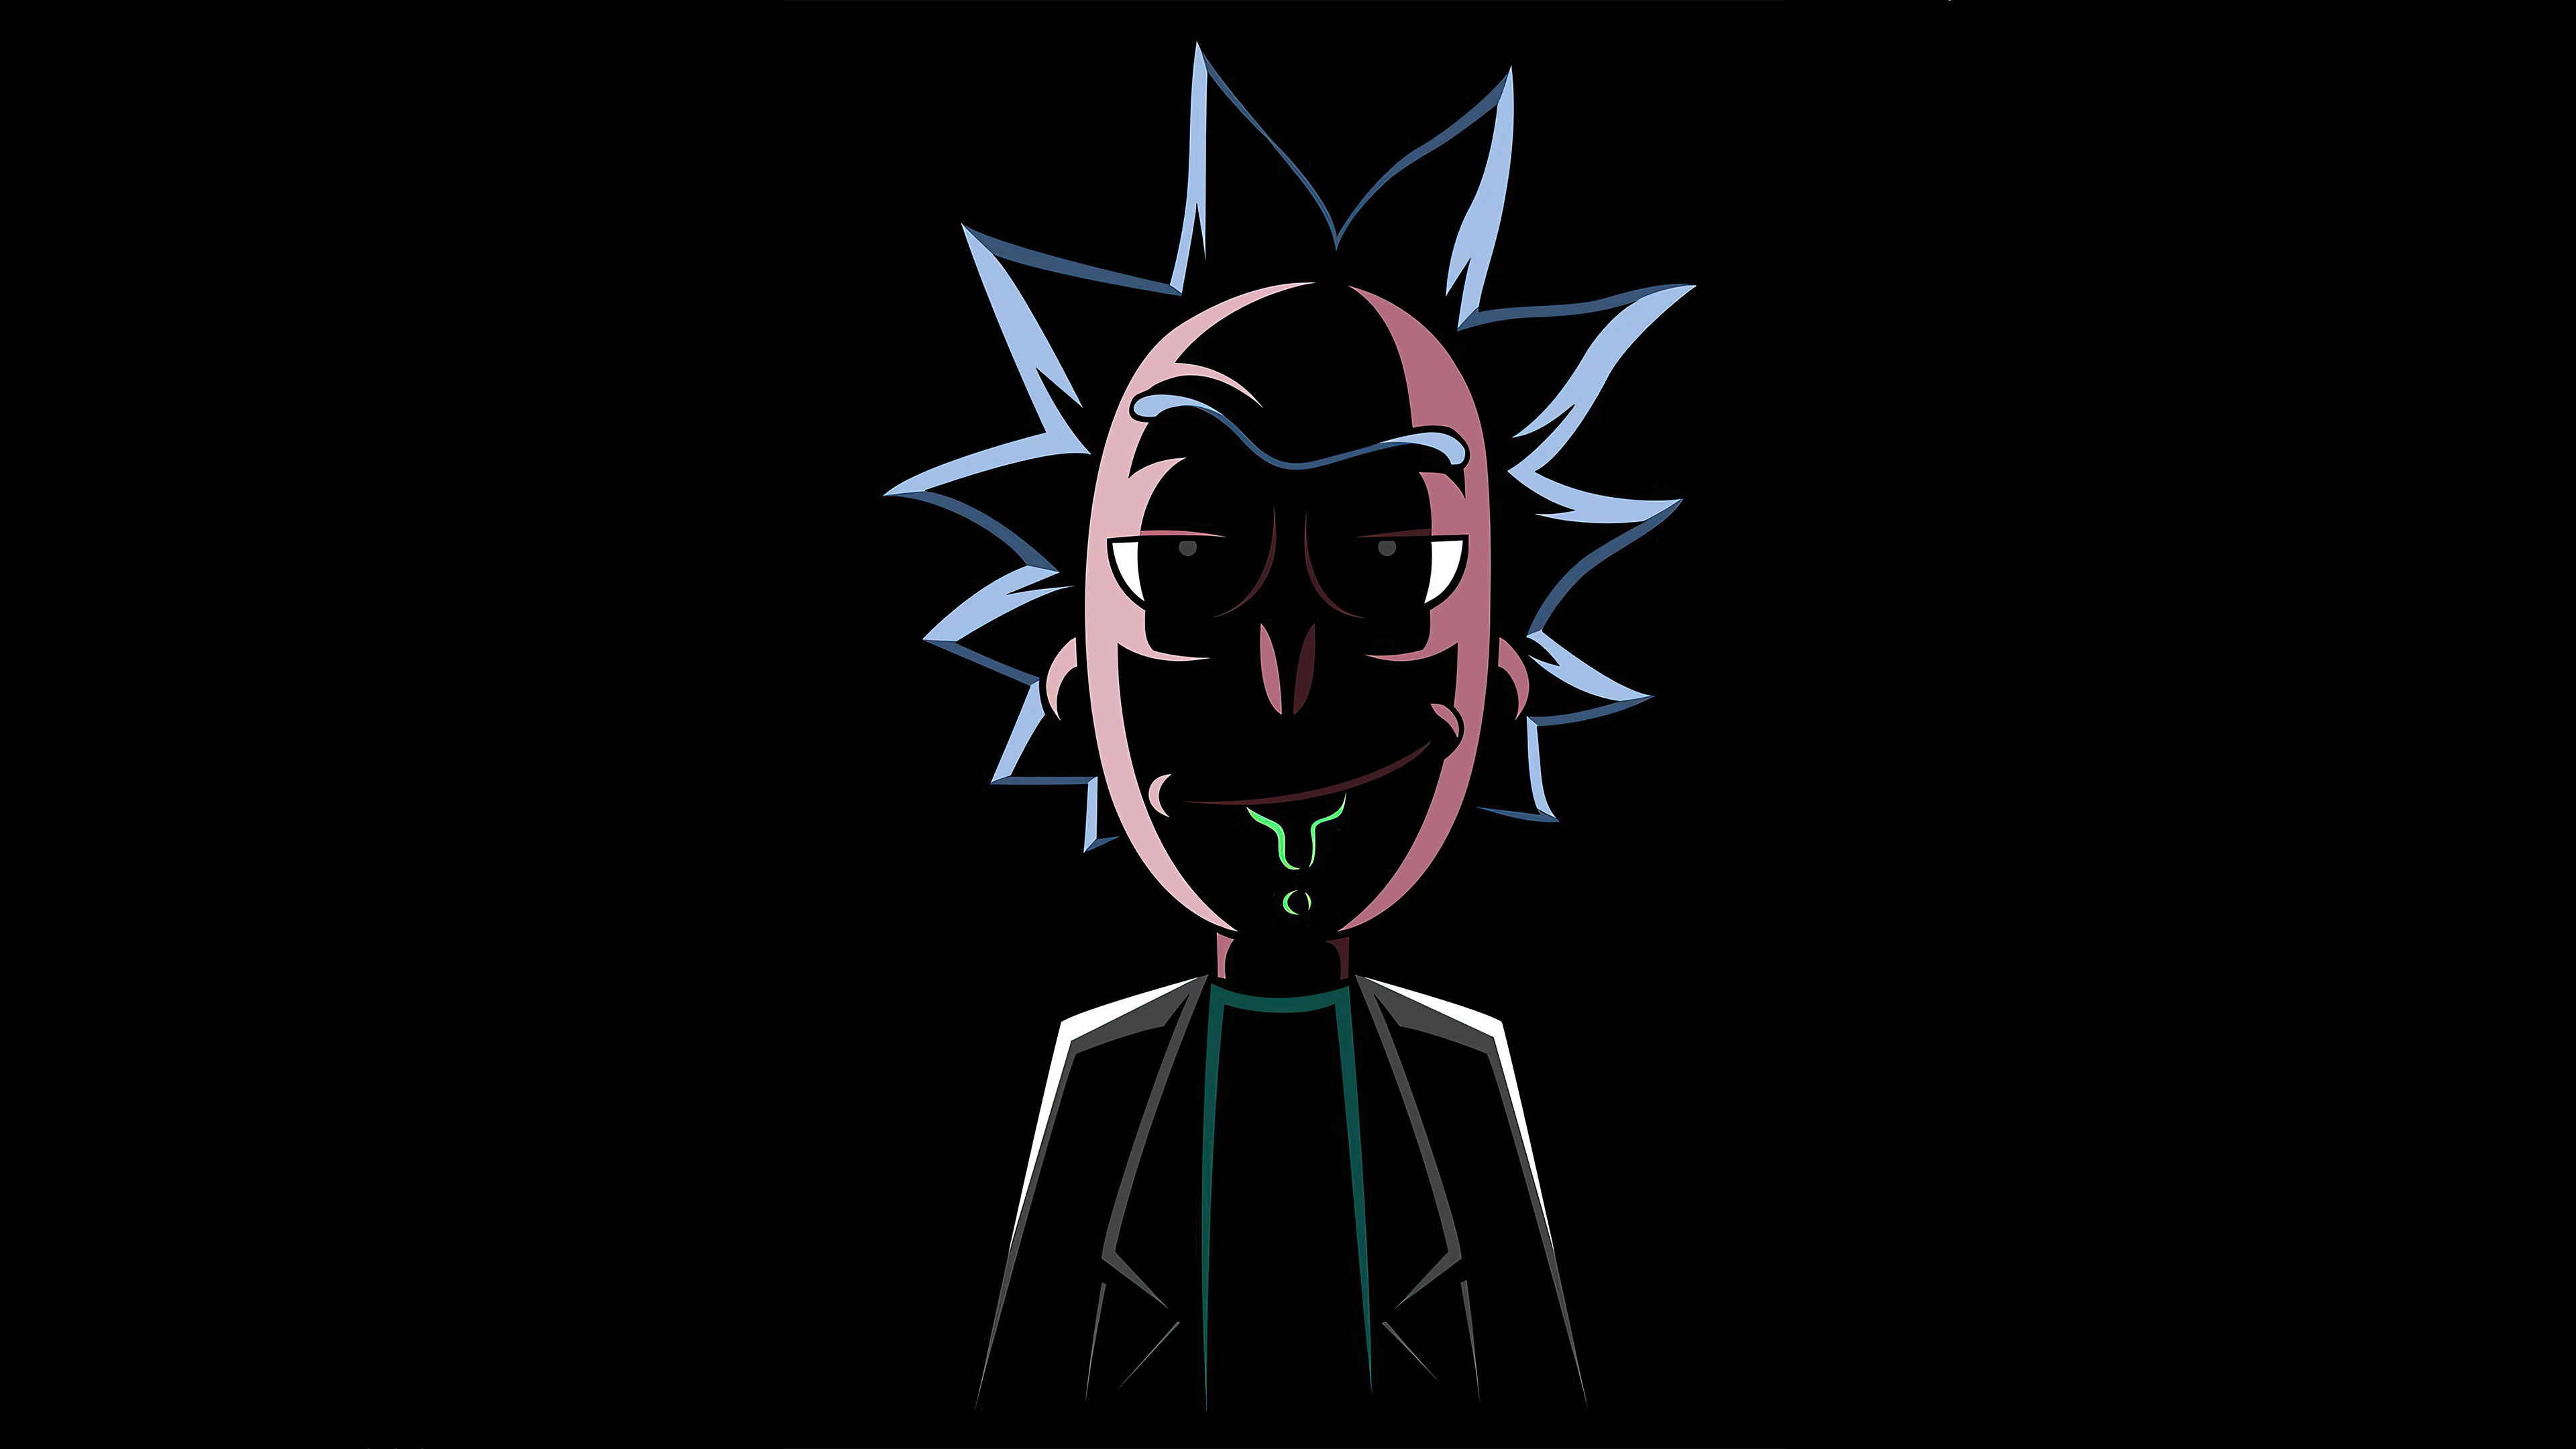 Wallpaper 4k Pc 1920x1080 Rick And Morty 1920x1080 Rick And Morty Hd